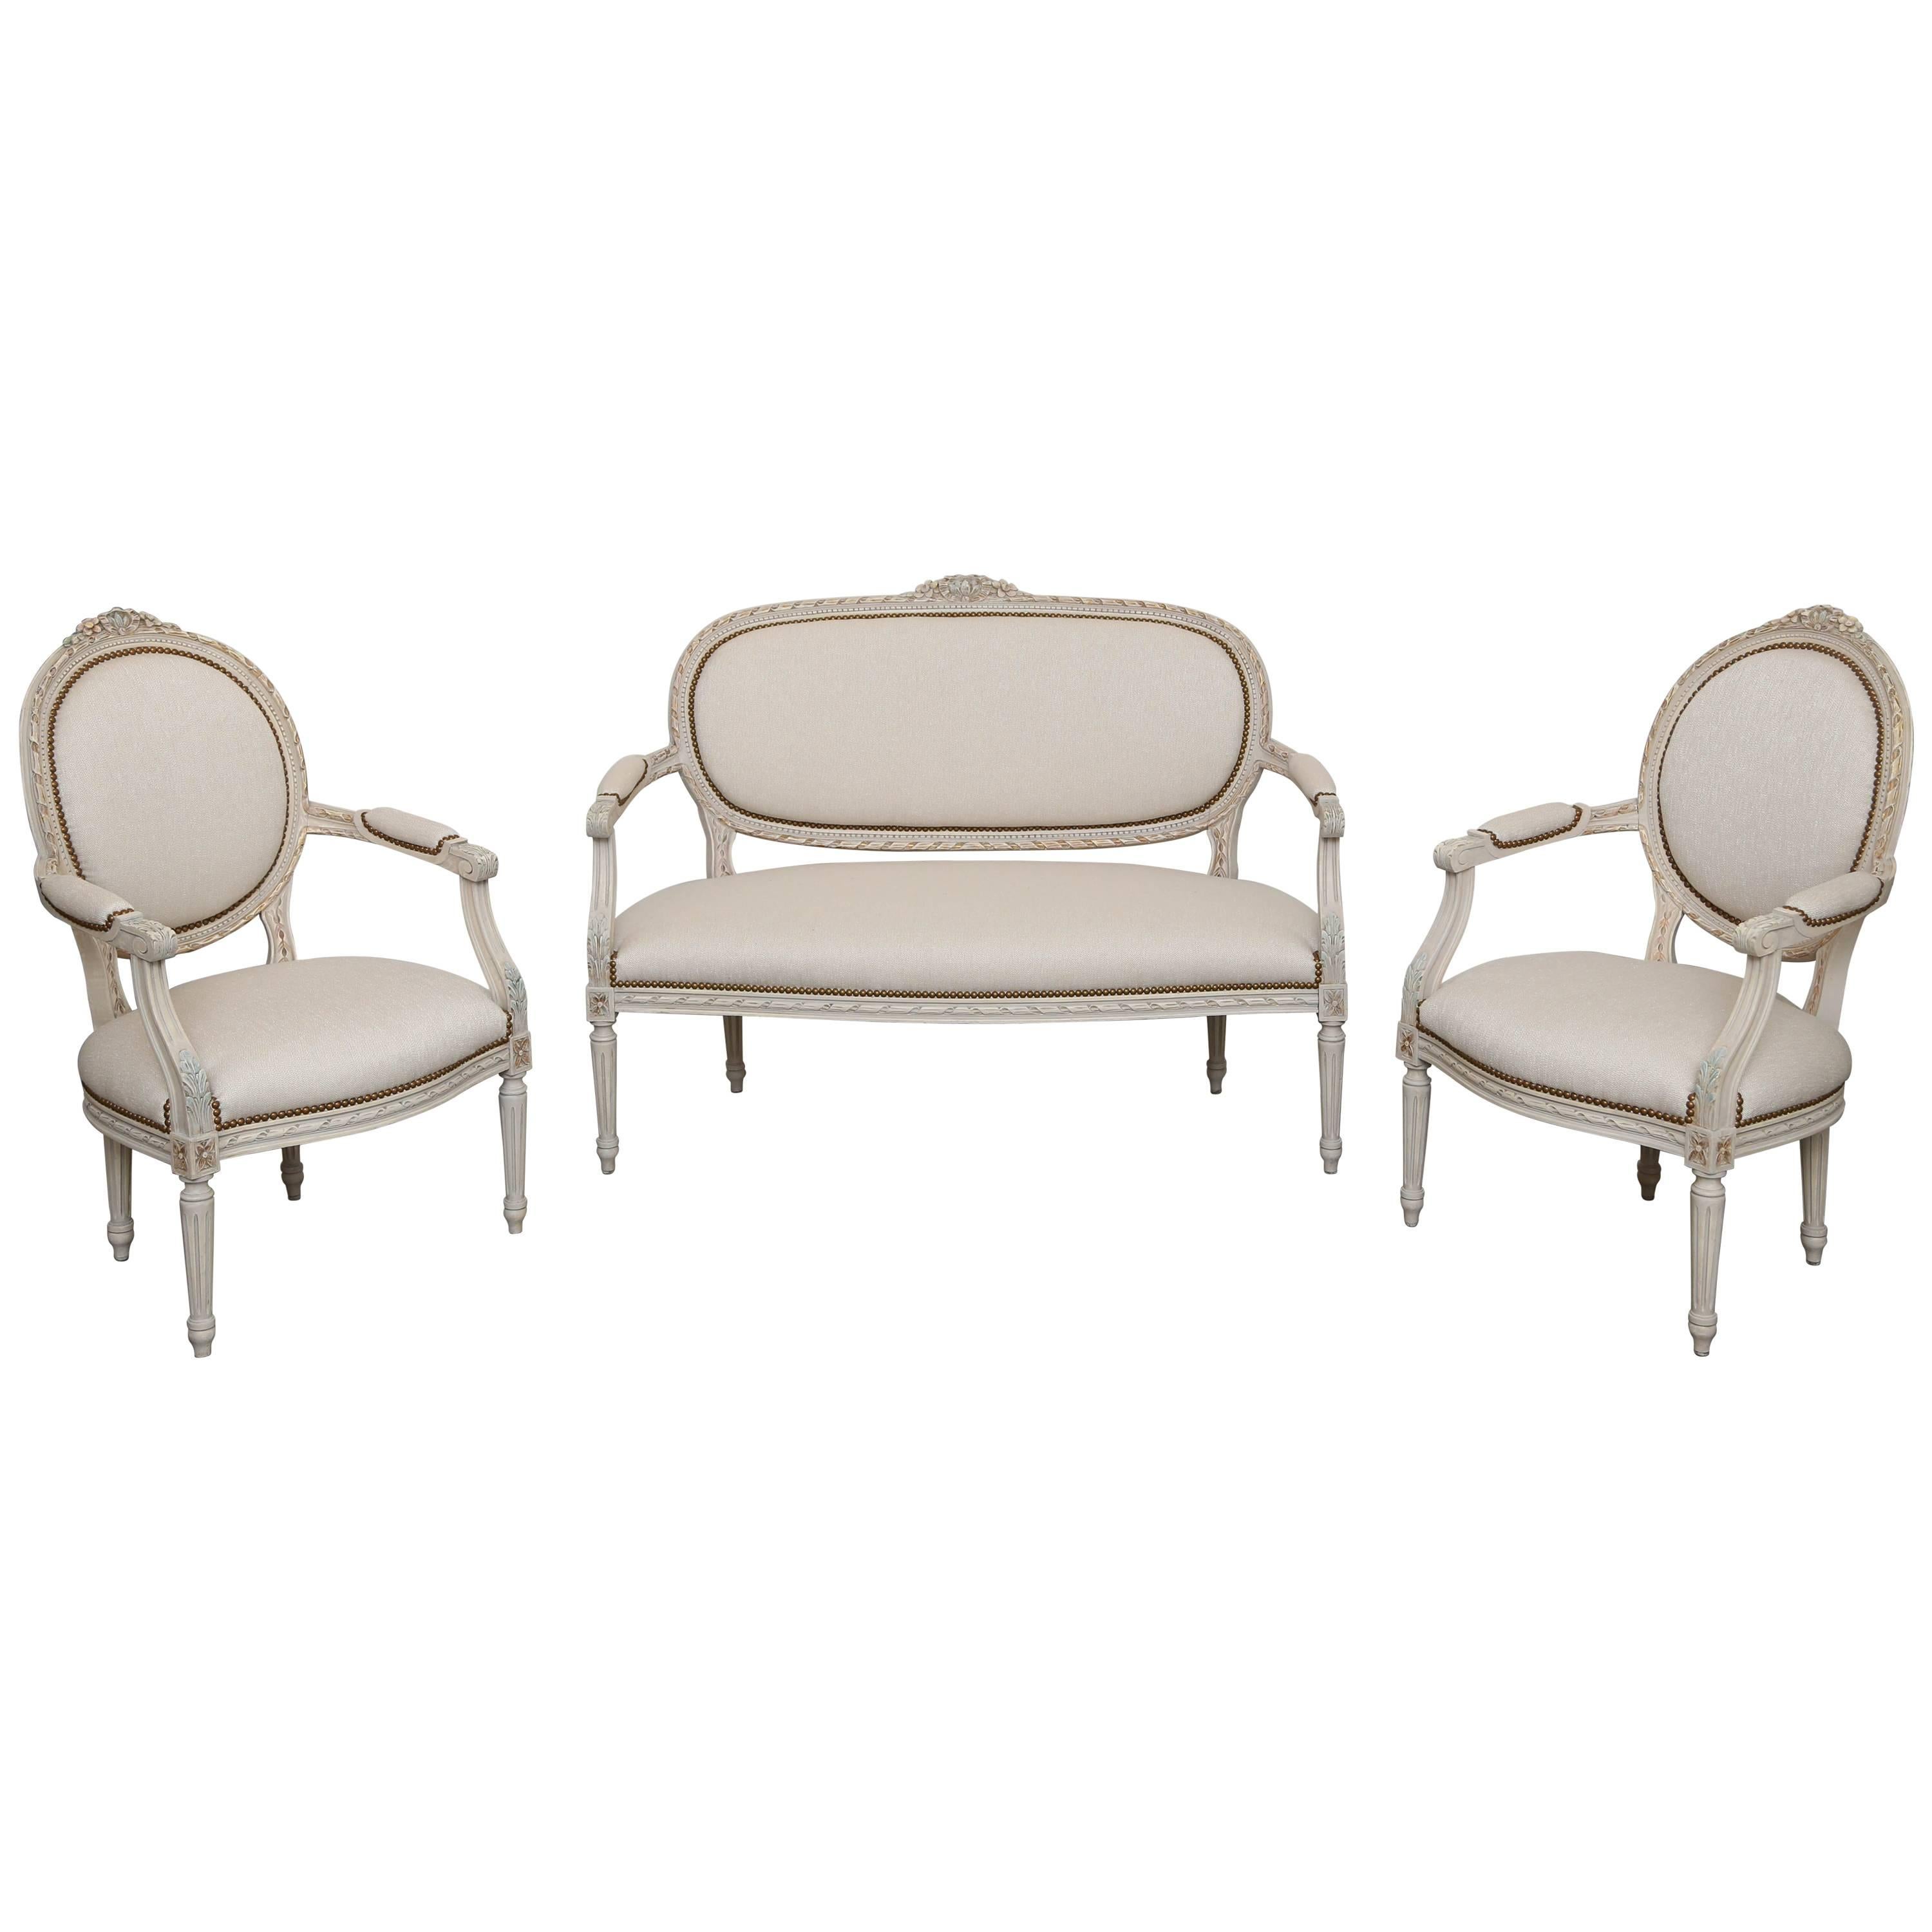 Antique Swedish Settee and Pair Armchairs Painted, Late 19th Century